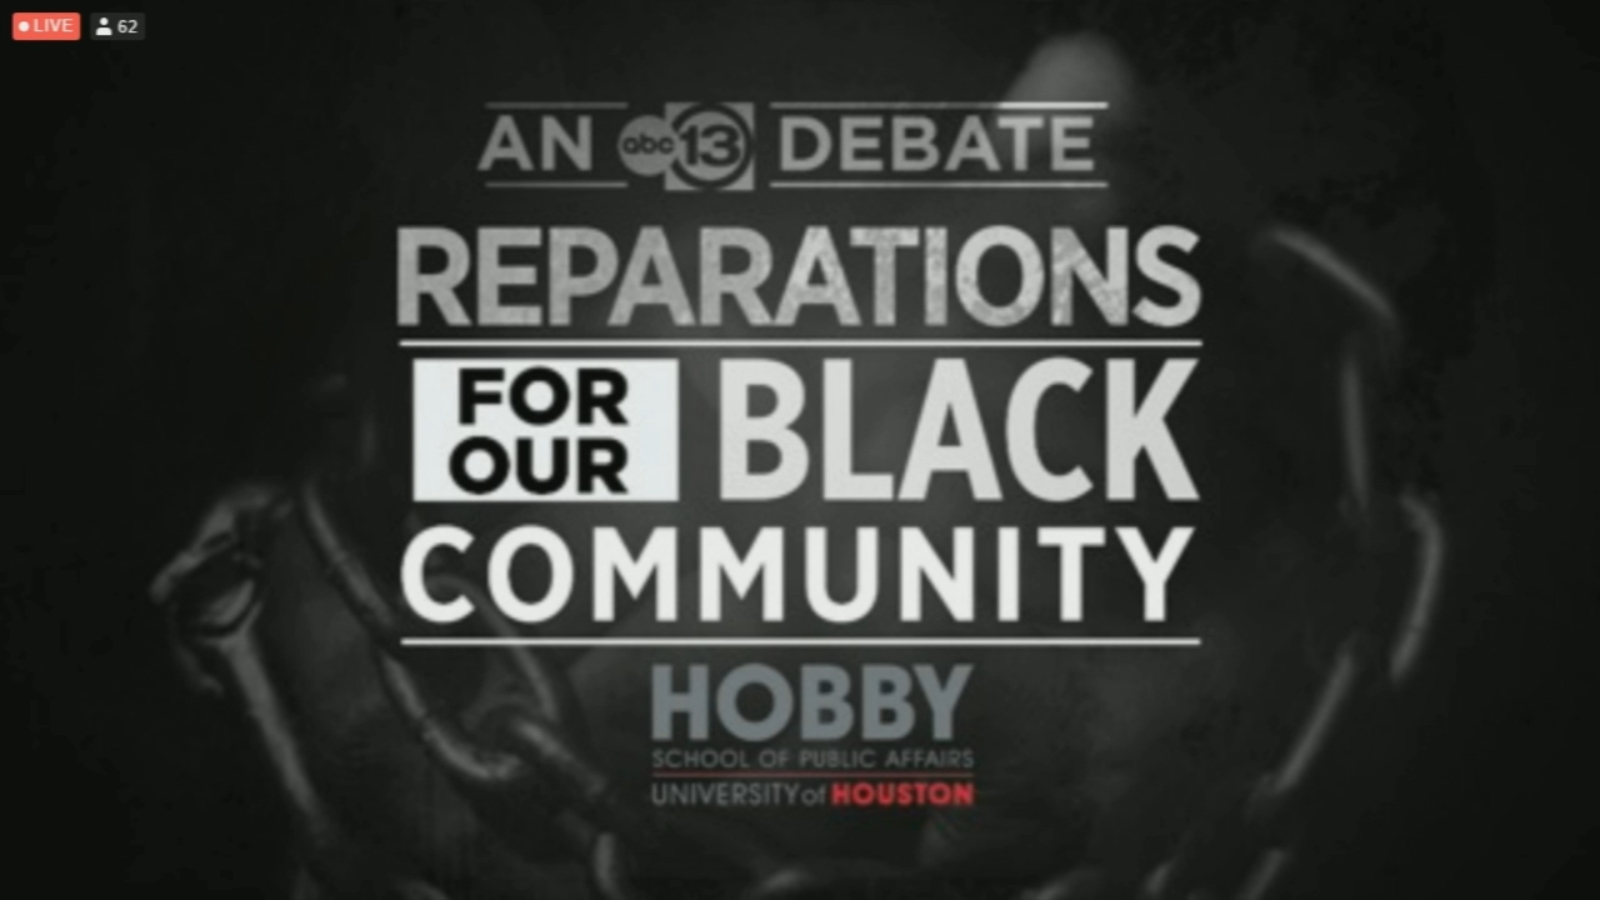 You are currently viewing National figures spar over Black reparations in ABC13-UH debate